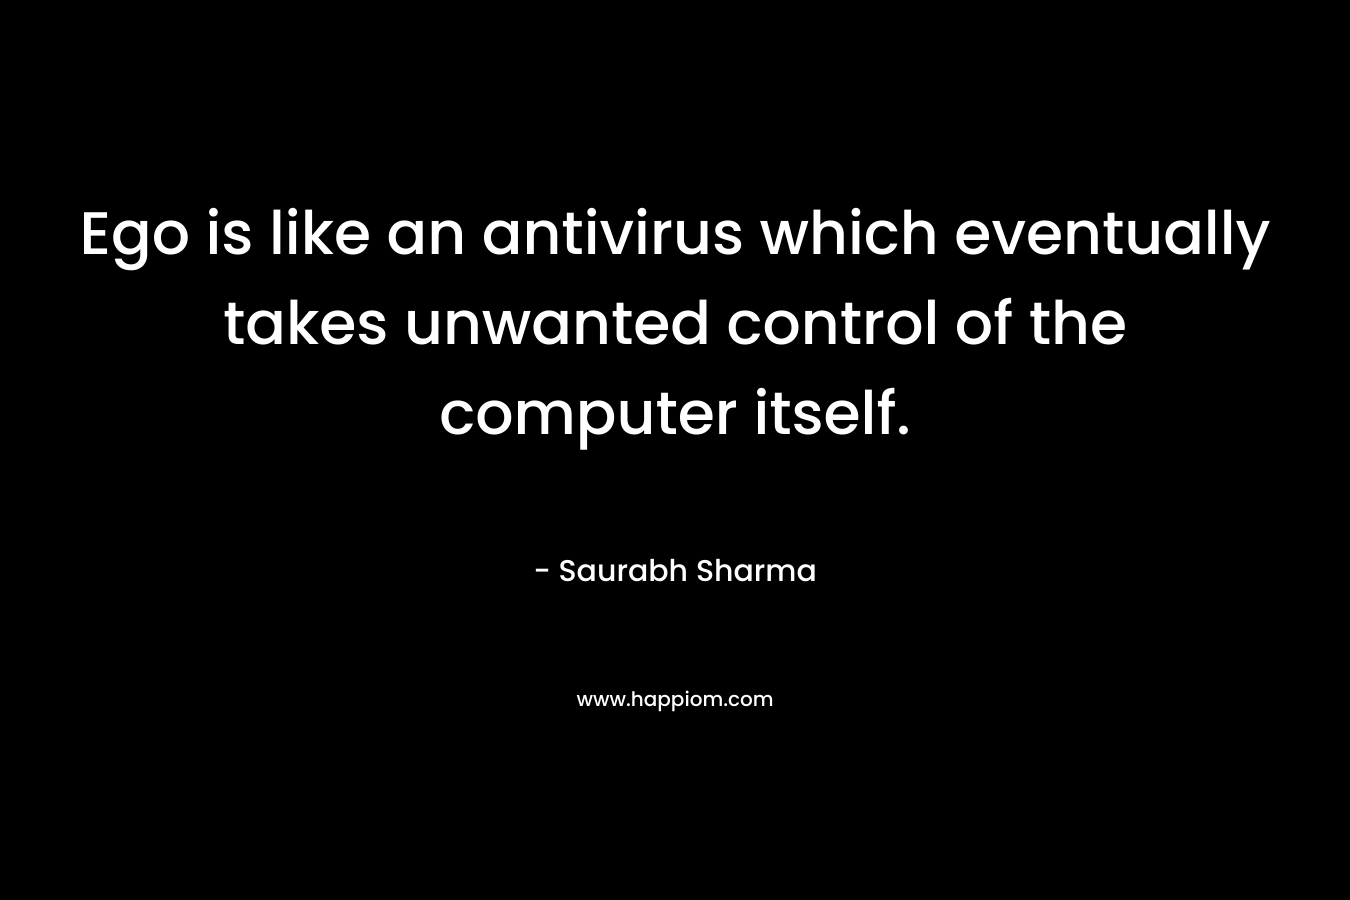 Ego is like an antivirus which eventually takes unwanted control of the computer itself. – Saurabh Sharma